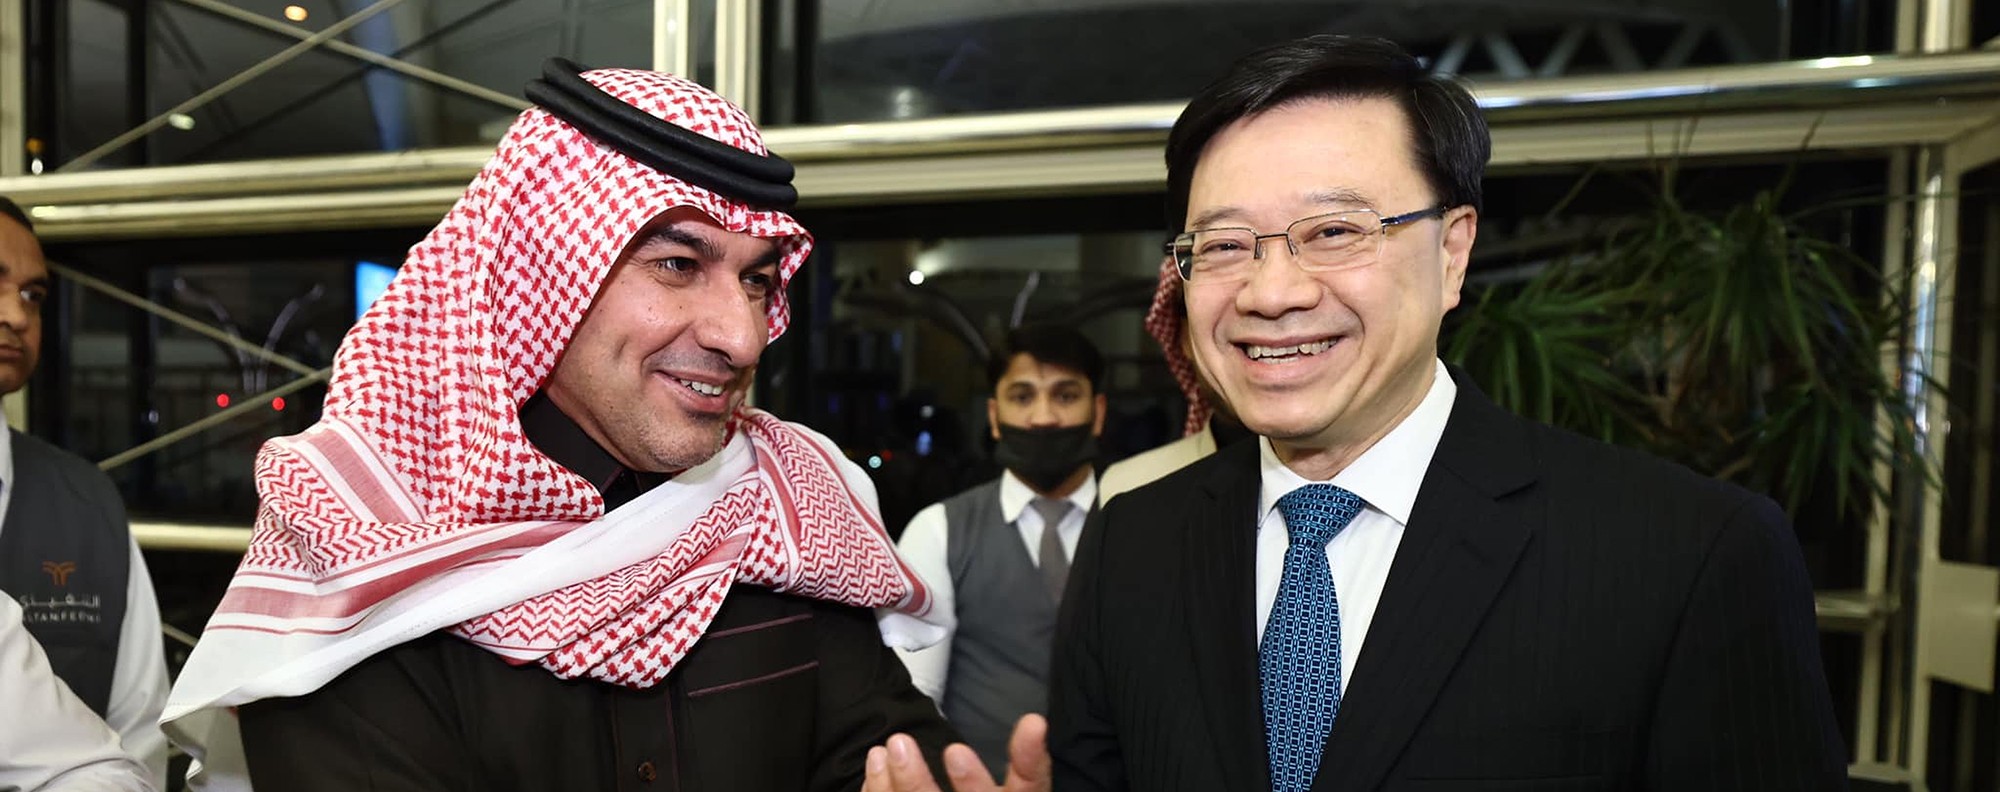 Badr AlBadr, deputy minister of Saudi Arabia’s Ministry of Investment, and John Lee. Photo: Facebook
